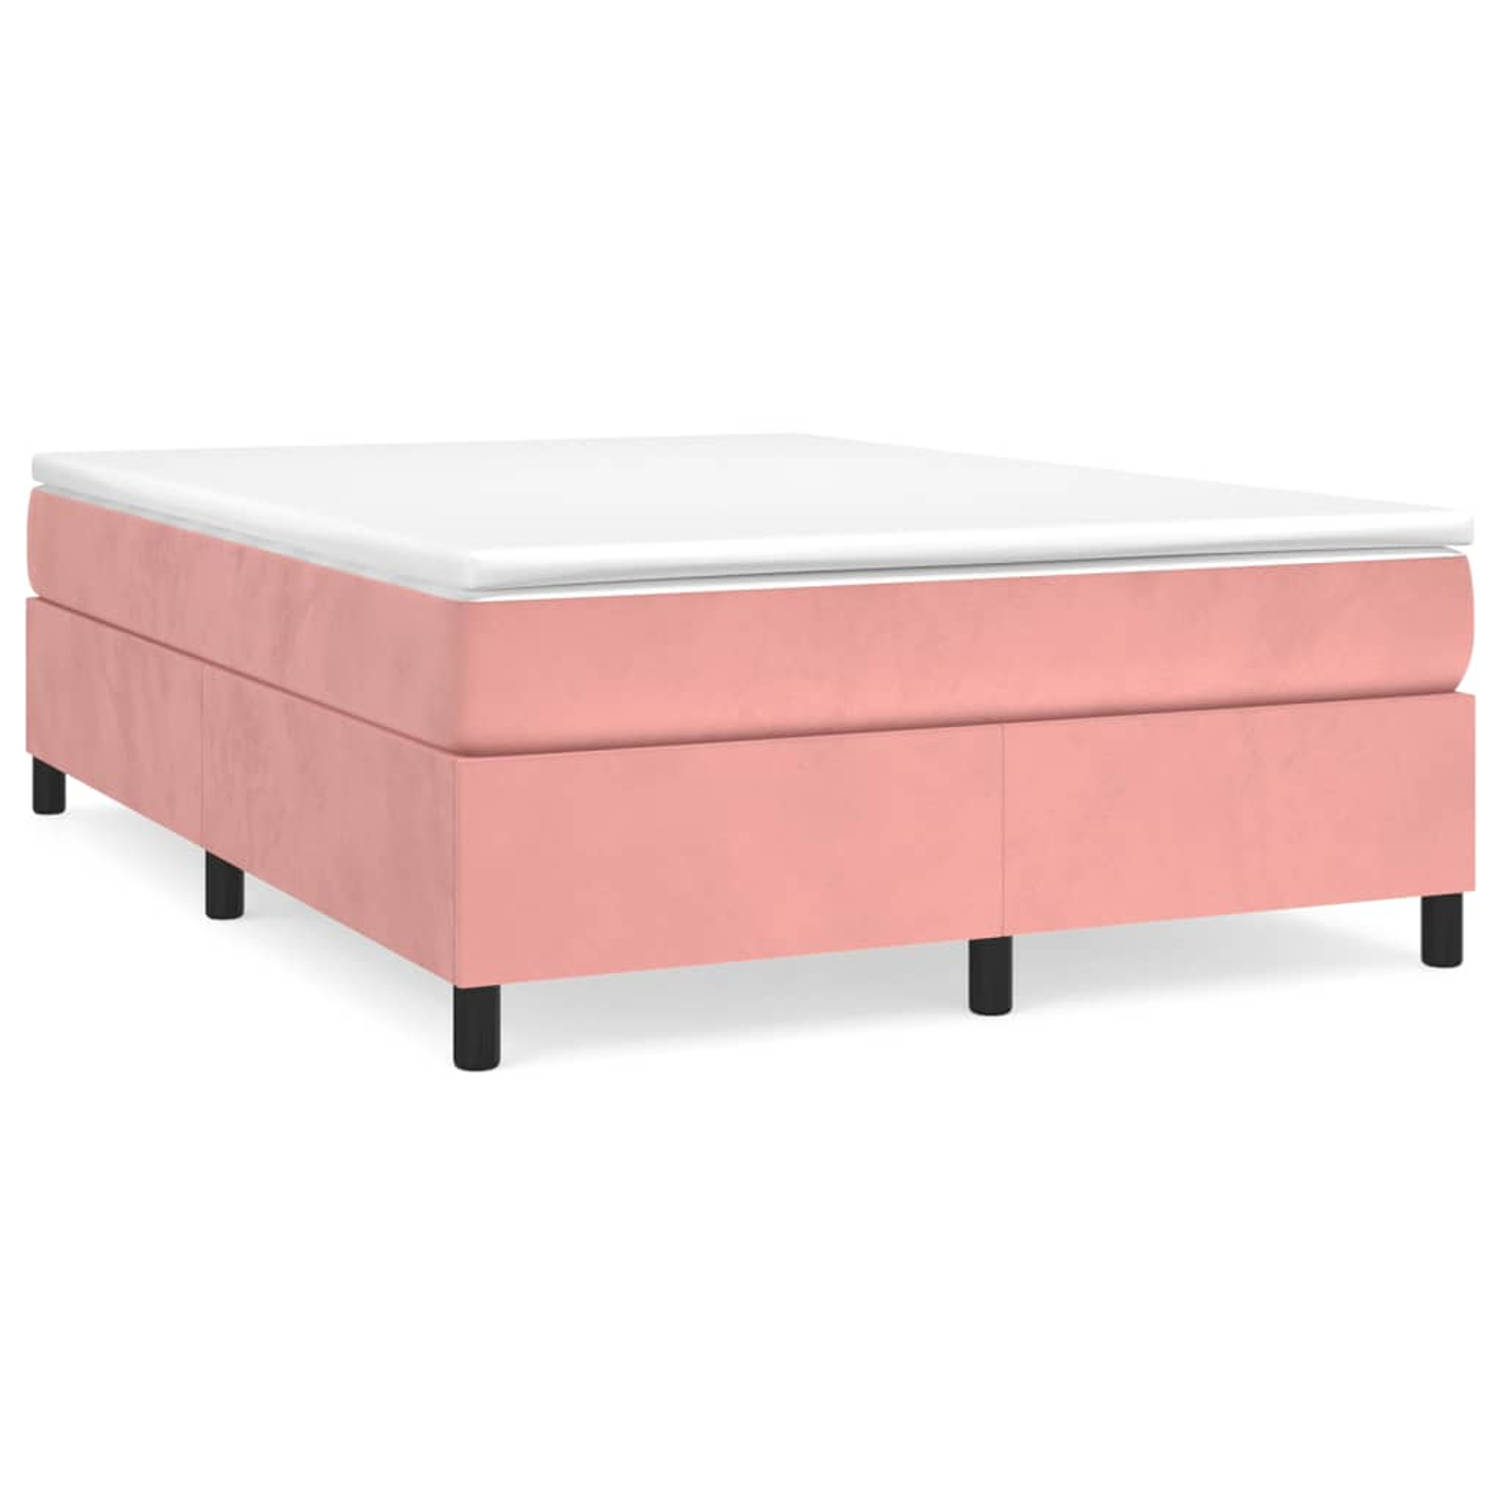 The Living Store Boxspringframe fluweel roze 140x200 cm - Bed